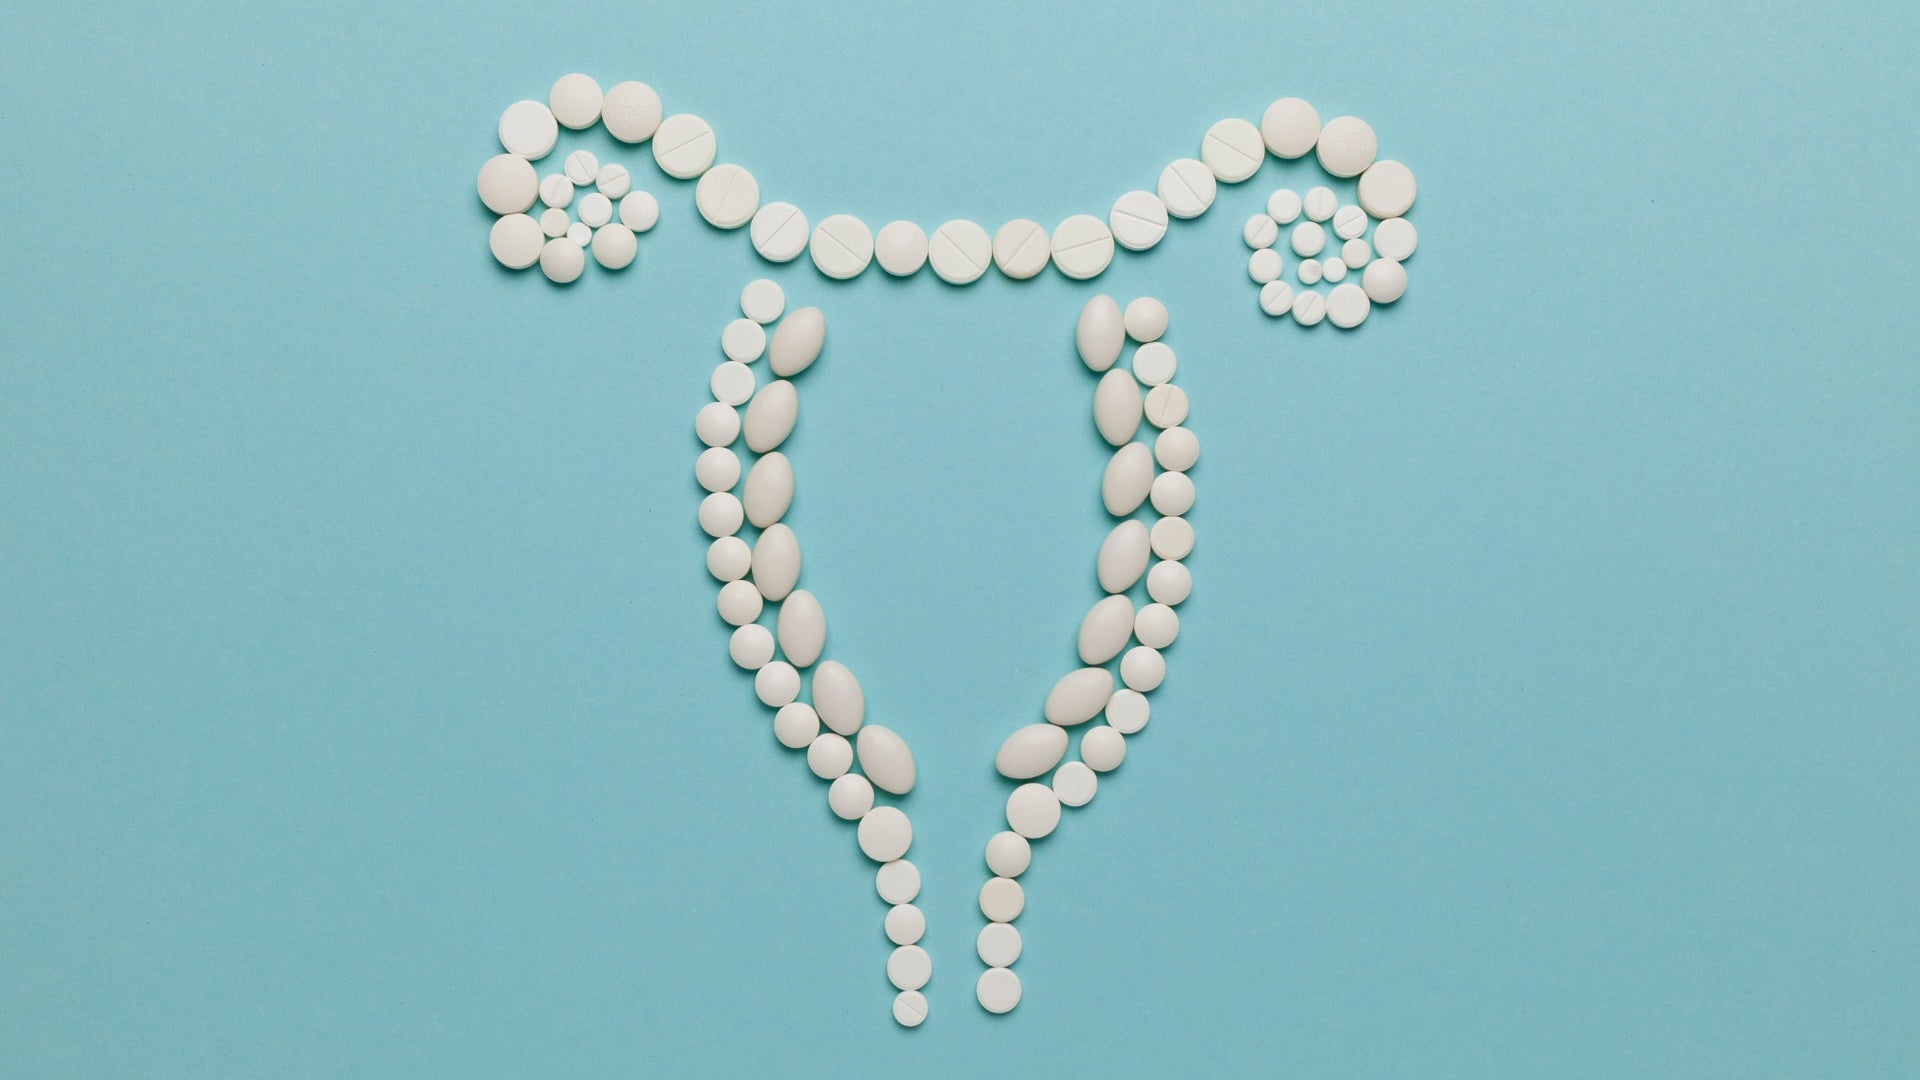 Tablets in the shape of a uterus